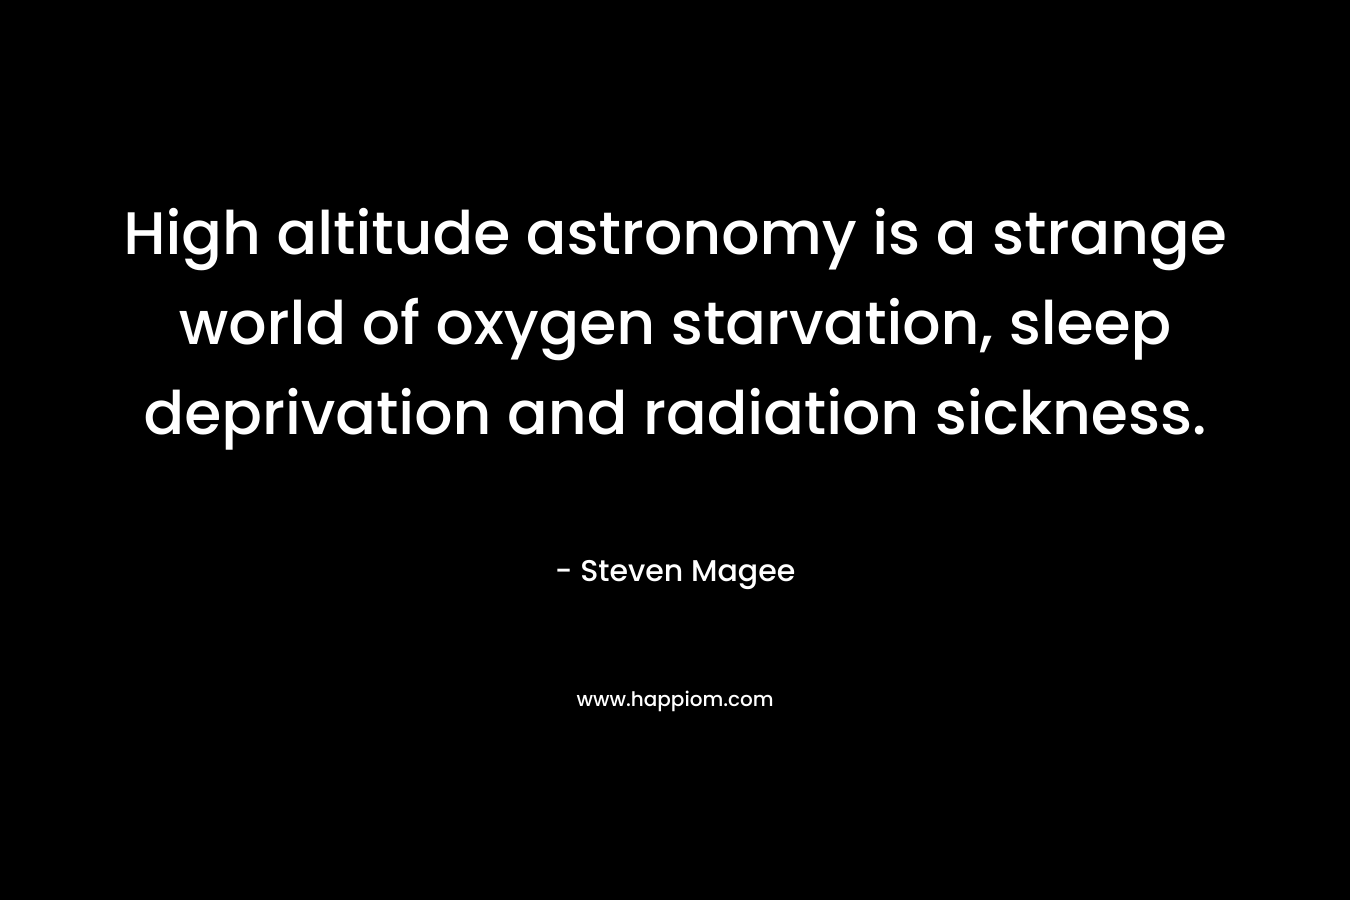 High altitude astronomy is a strange world of oxygen starvation, sleep deprivation and radiation sickness. – Steven Magee